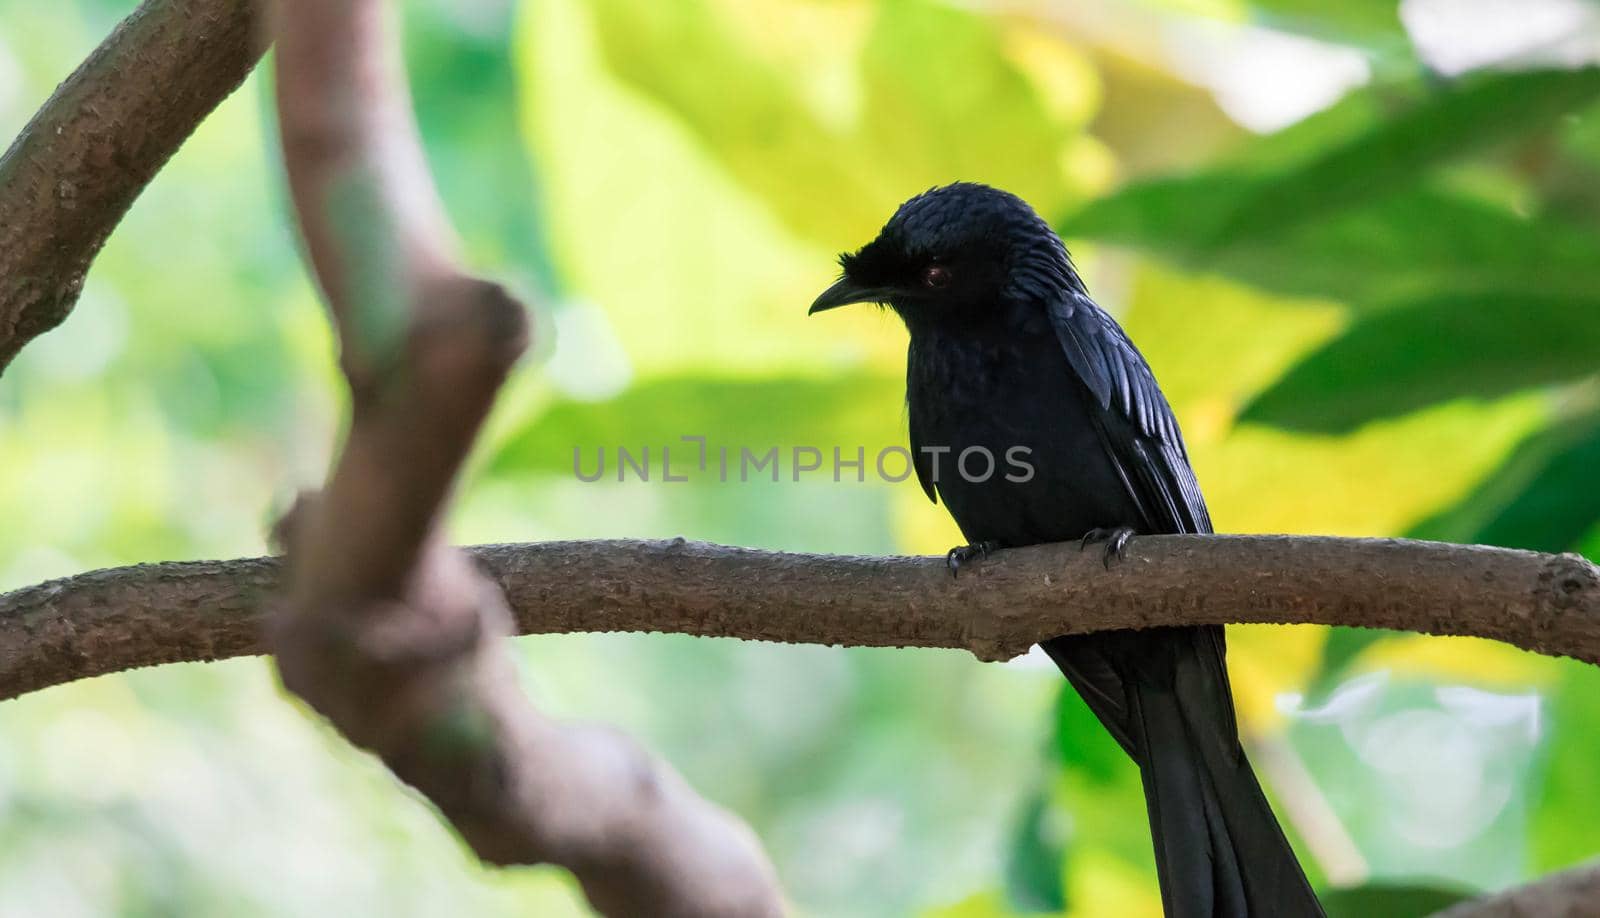 A Tristram's Starling / grackle (Onychognathus tristramii). A species of starling native to the Middle East,nesting mainly on rocky cliff faces.